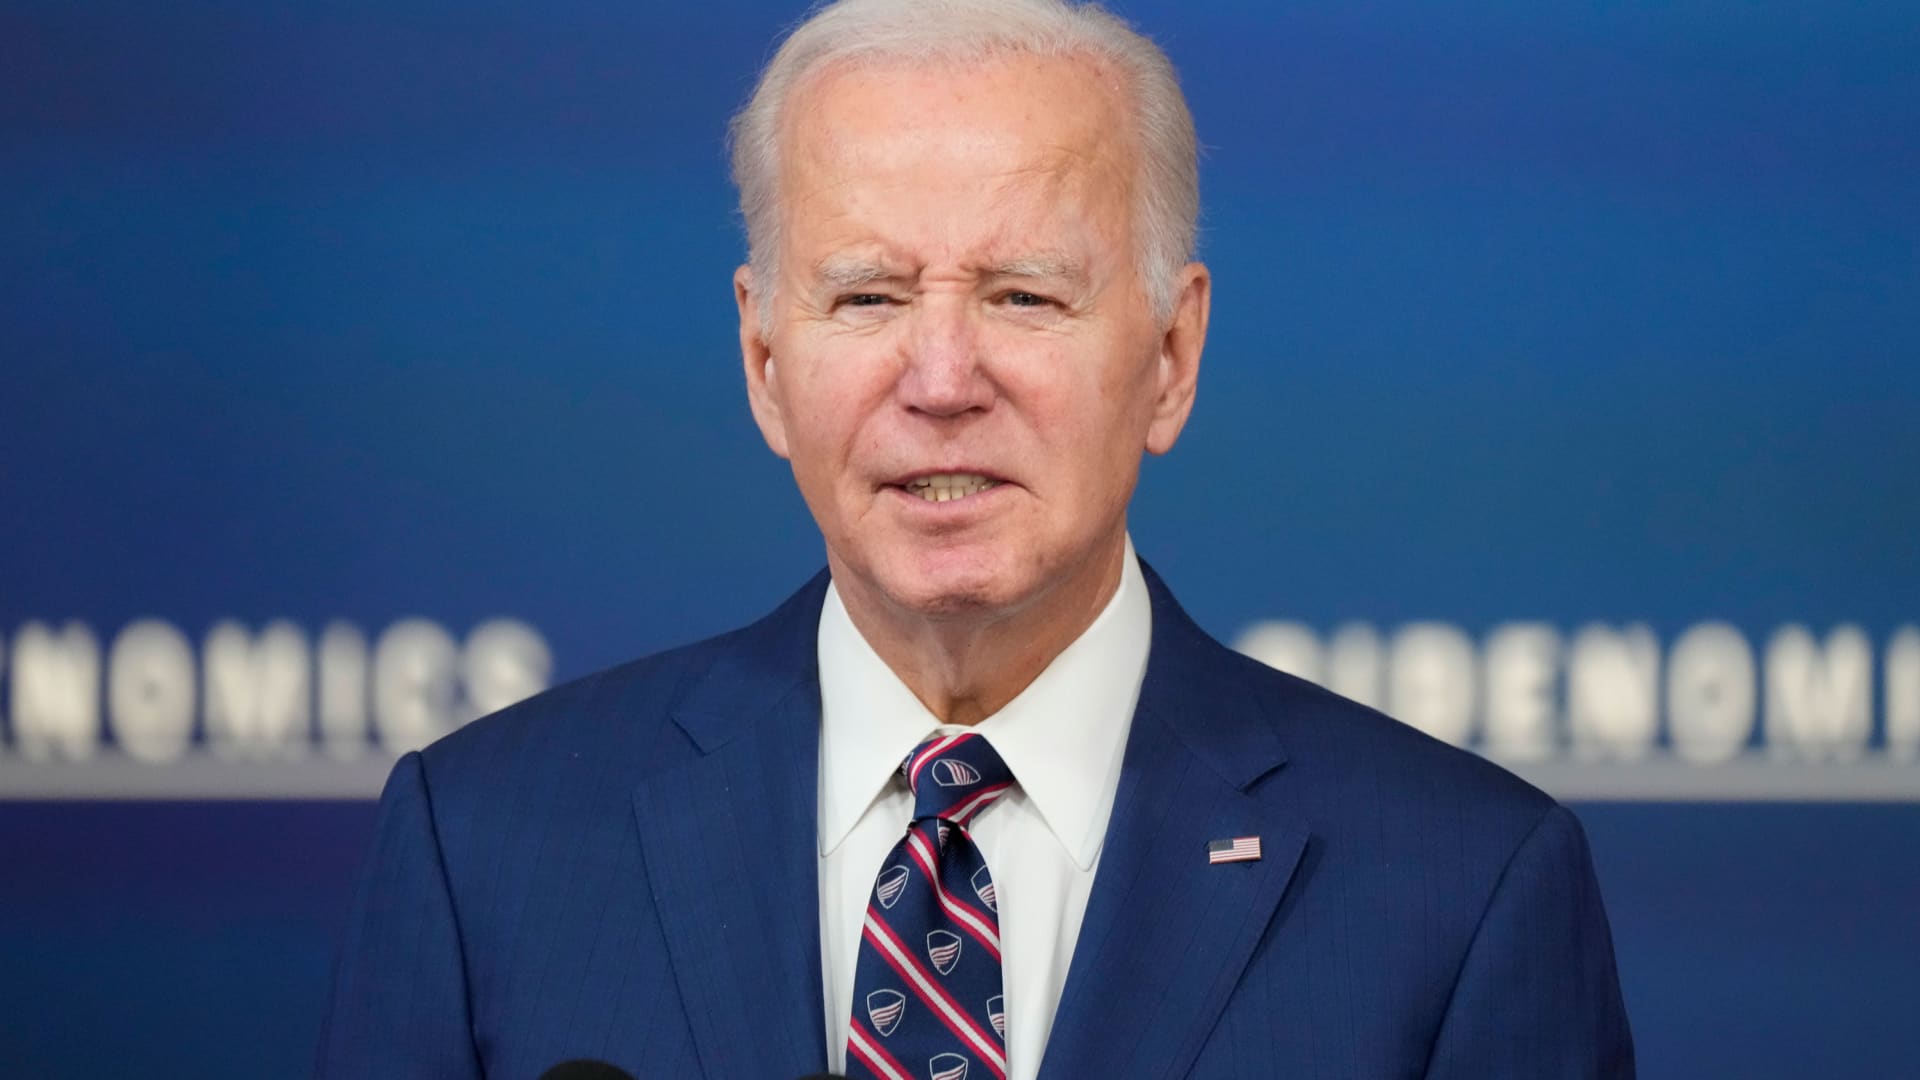 Biden hails hot GDP report, but voters don’t see the rosy picture Wall Street does